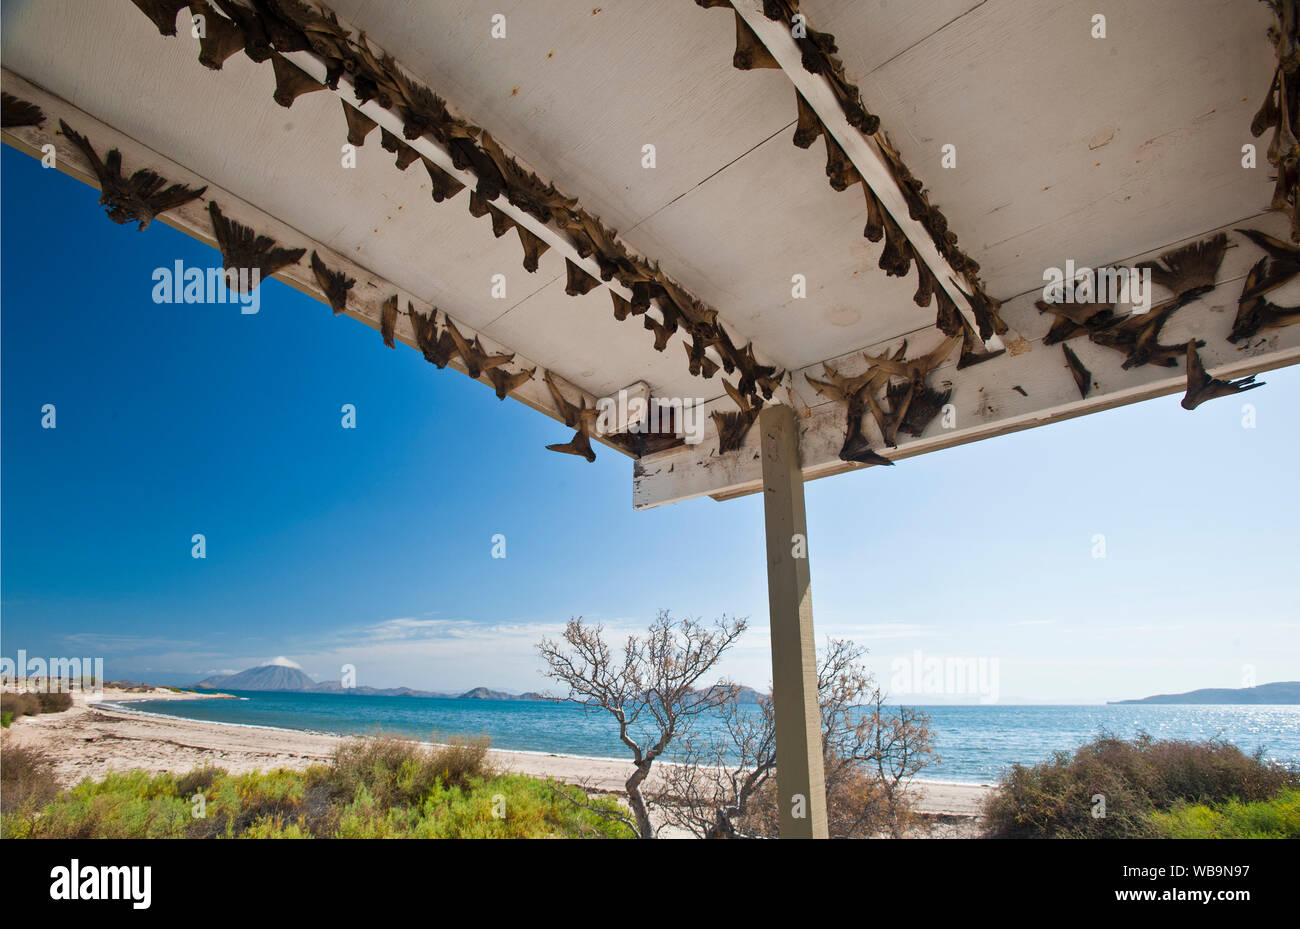 Ceiling of abandoned fishing camp in Bahia de Los Angeles, Baja, Mexico. There are over 500 yellowtail and sea bass tails nailed to the porch rafters. Stock Photo